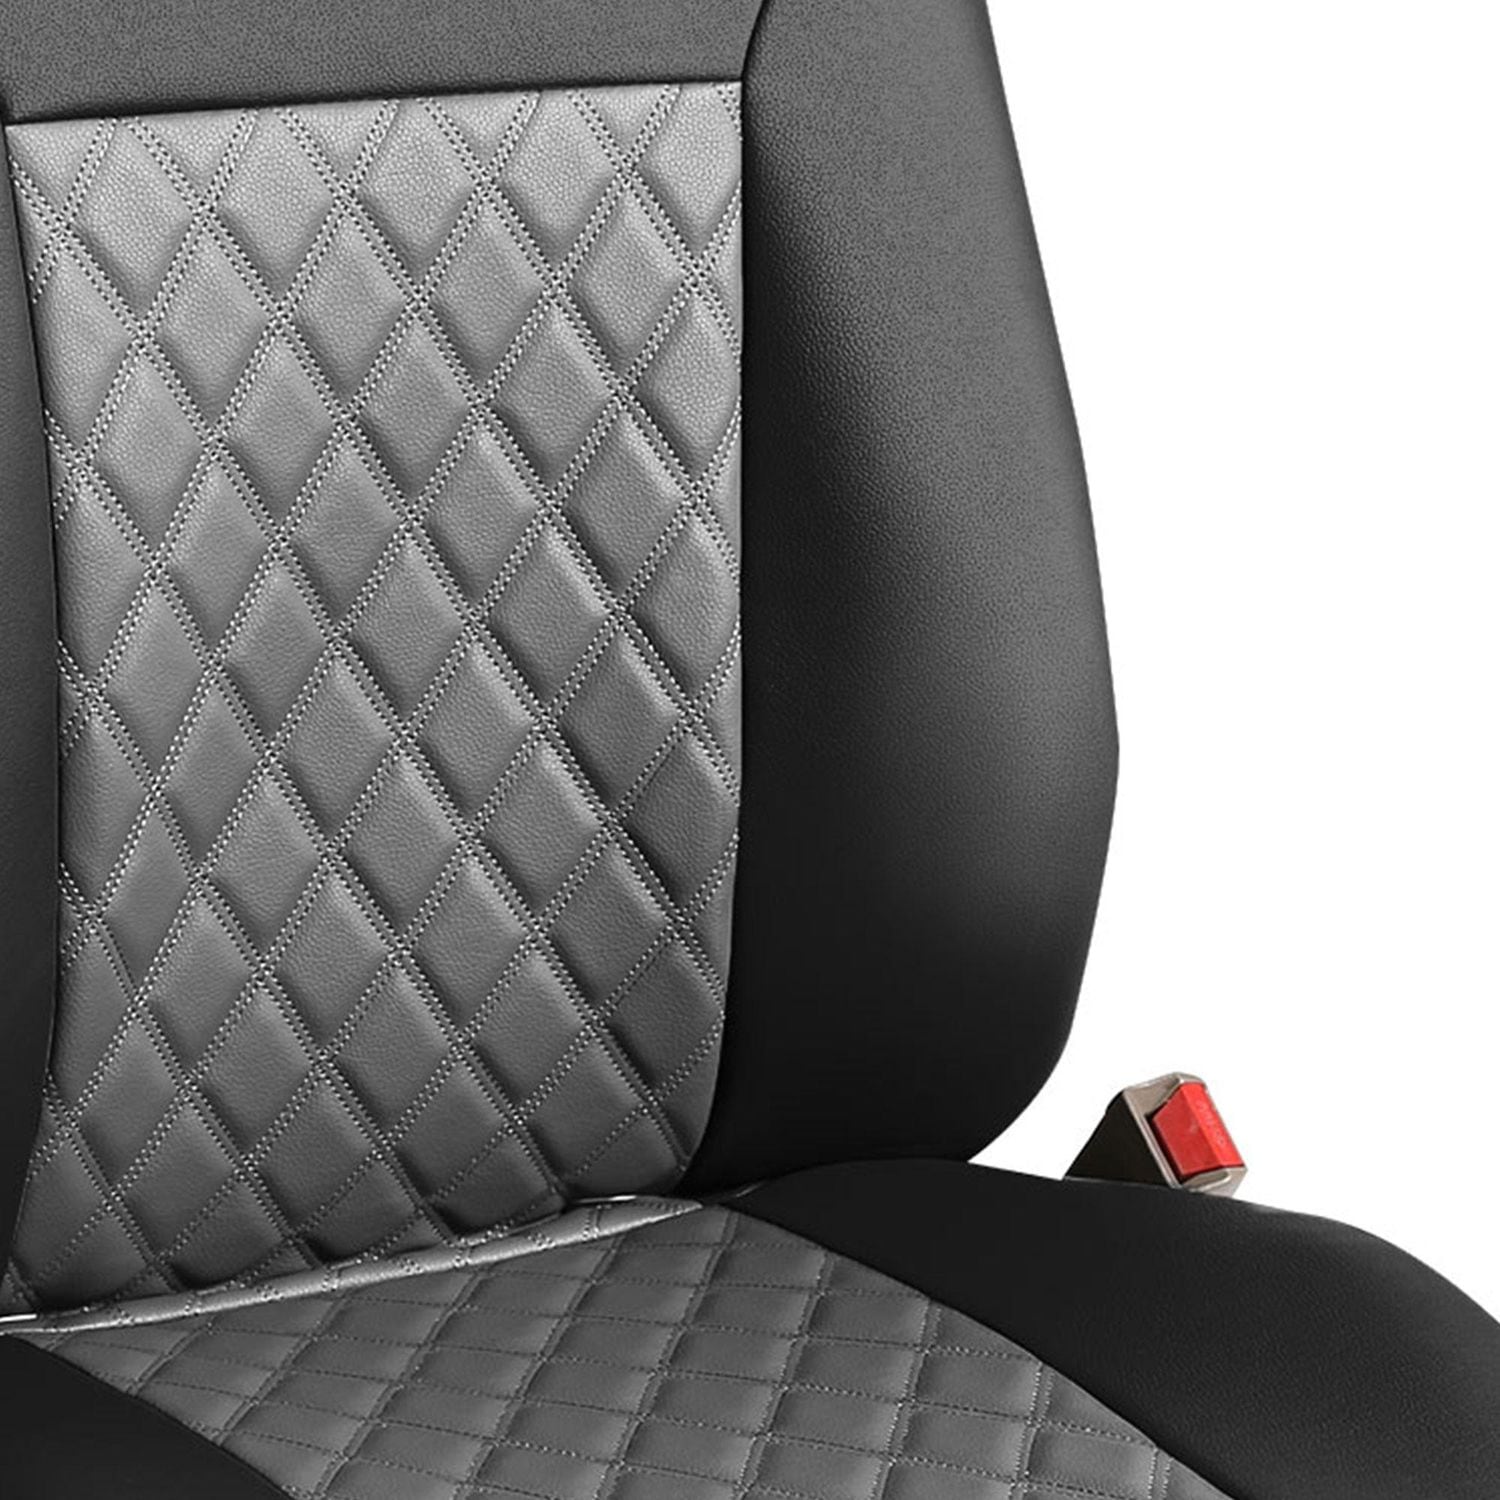 FH Group Deluxe Diamond Pattern Faux Leather Seat Cushions for Car